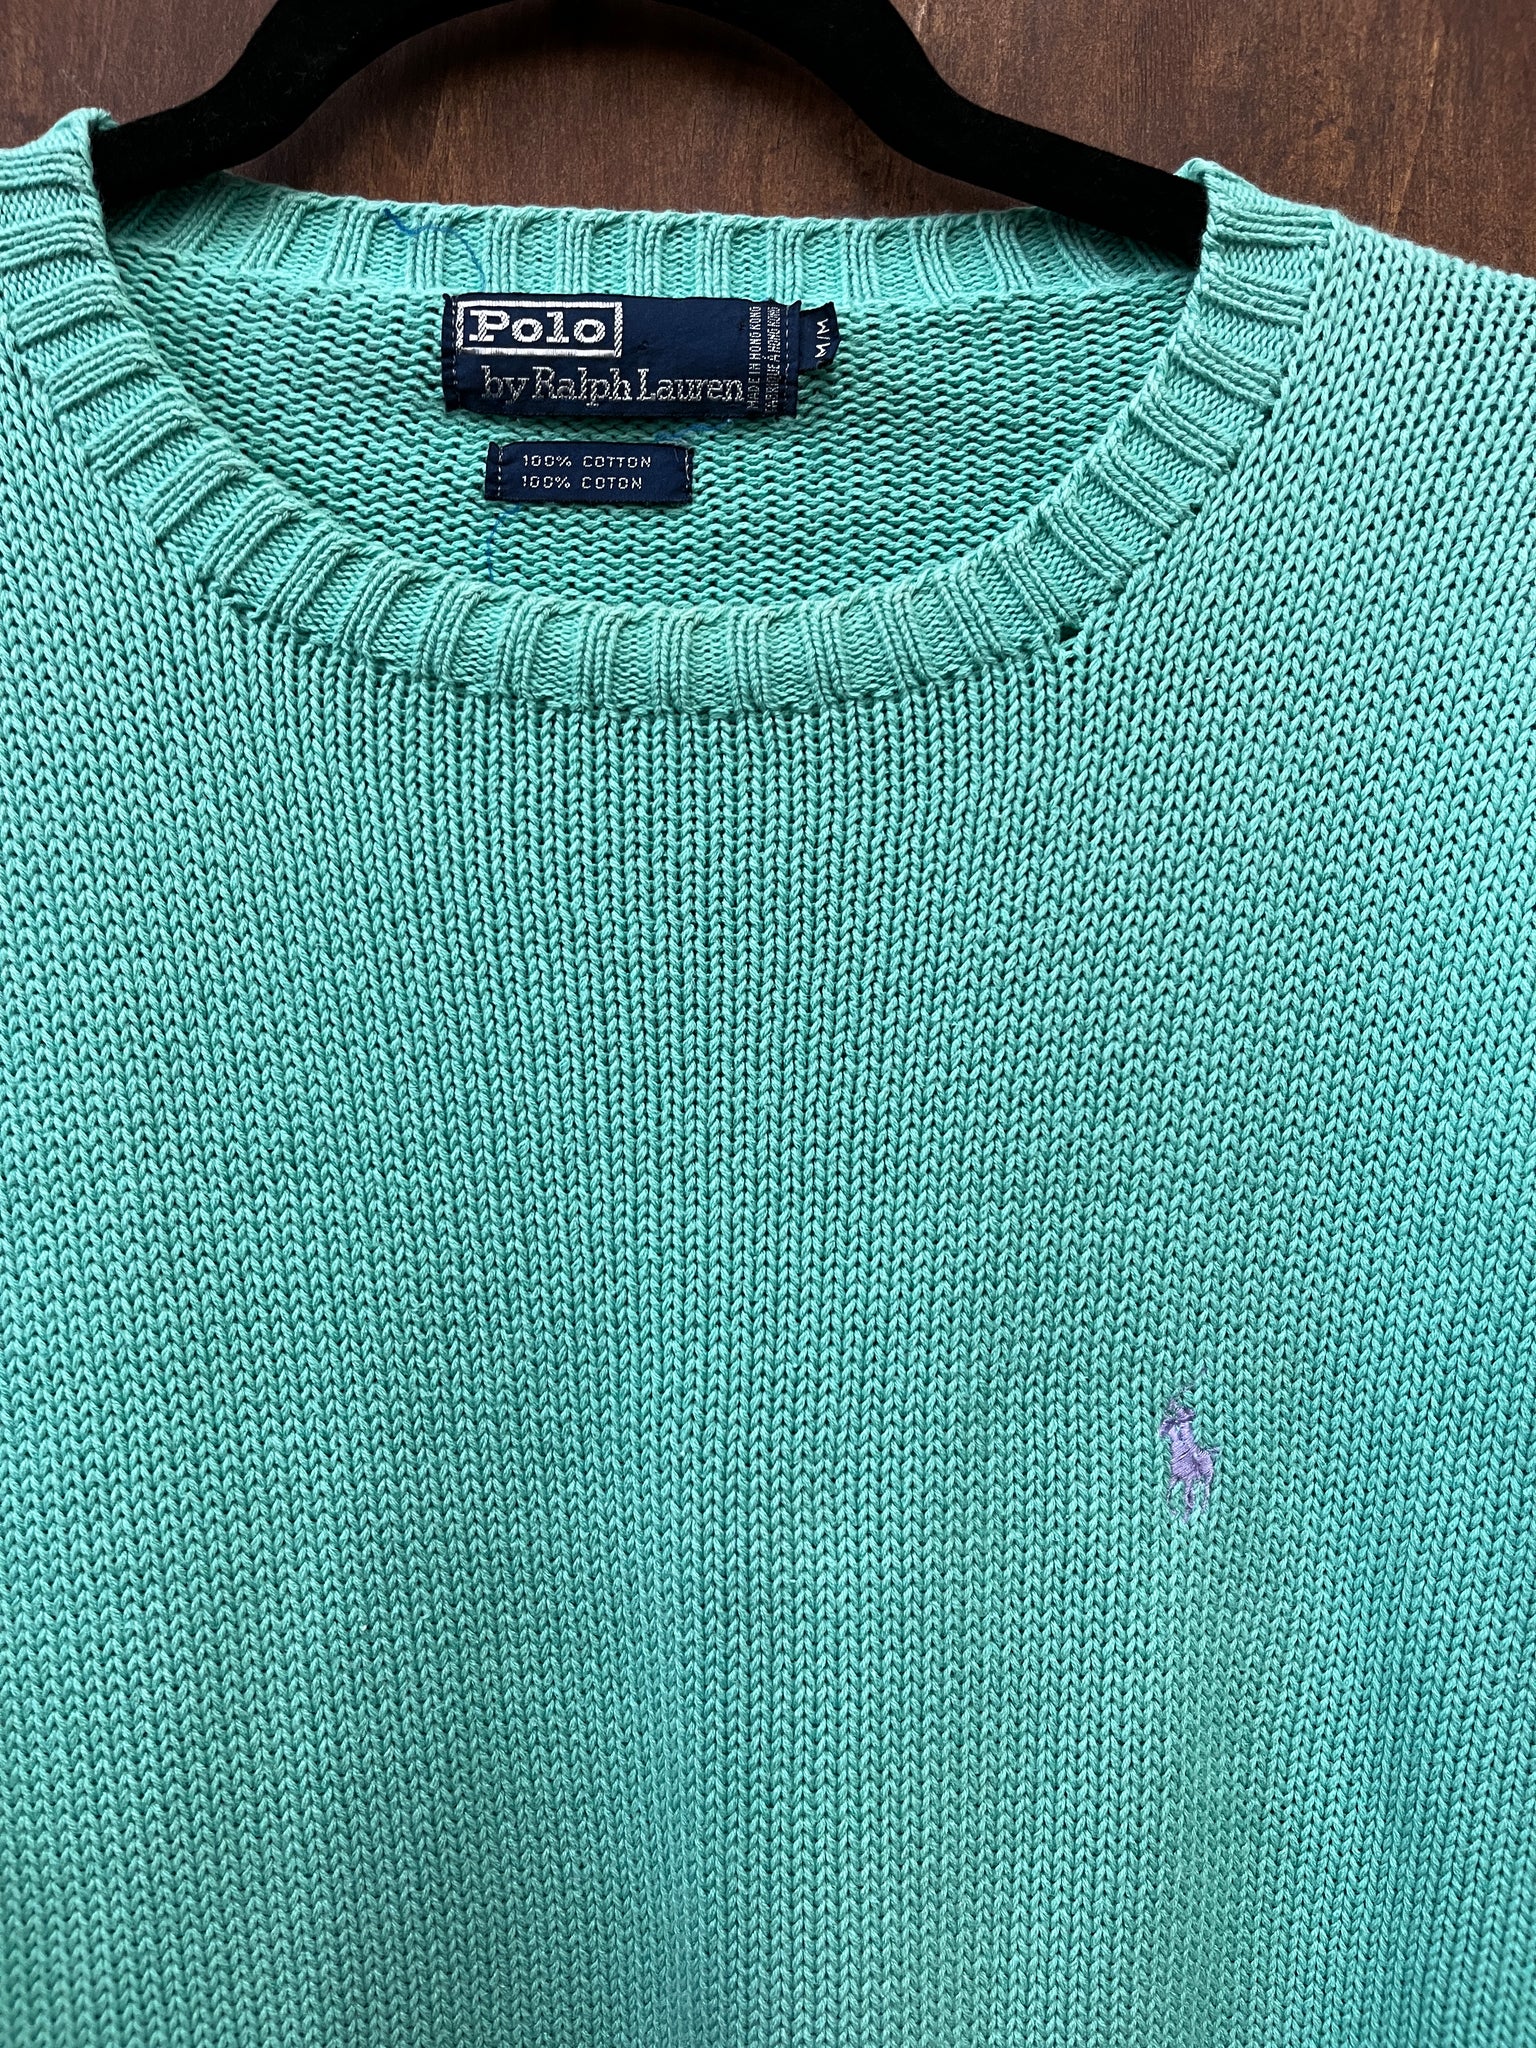 1990s MENS SWEATER- Polo mint green cotton